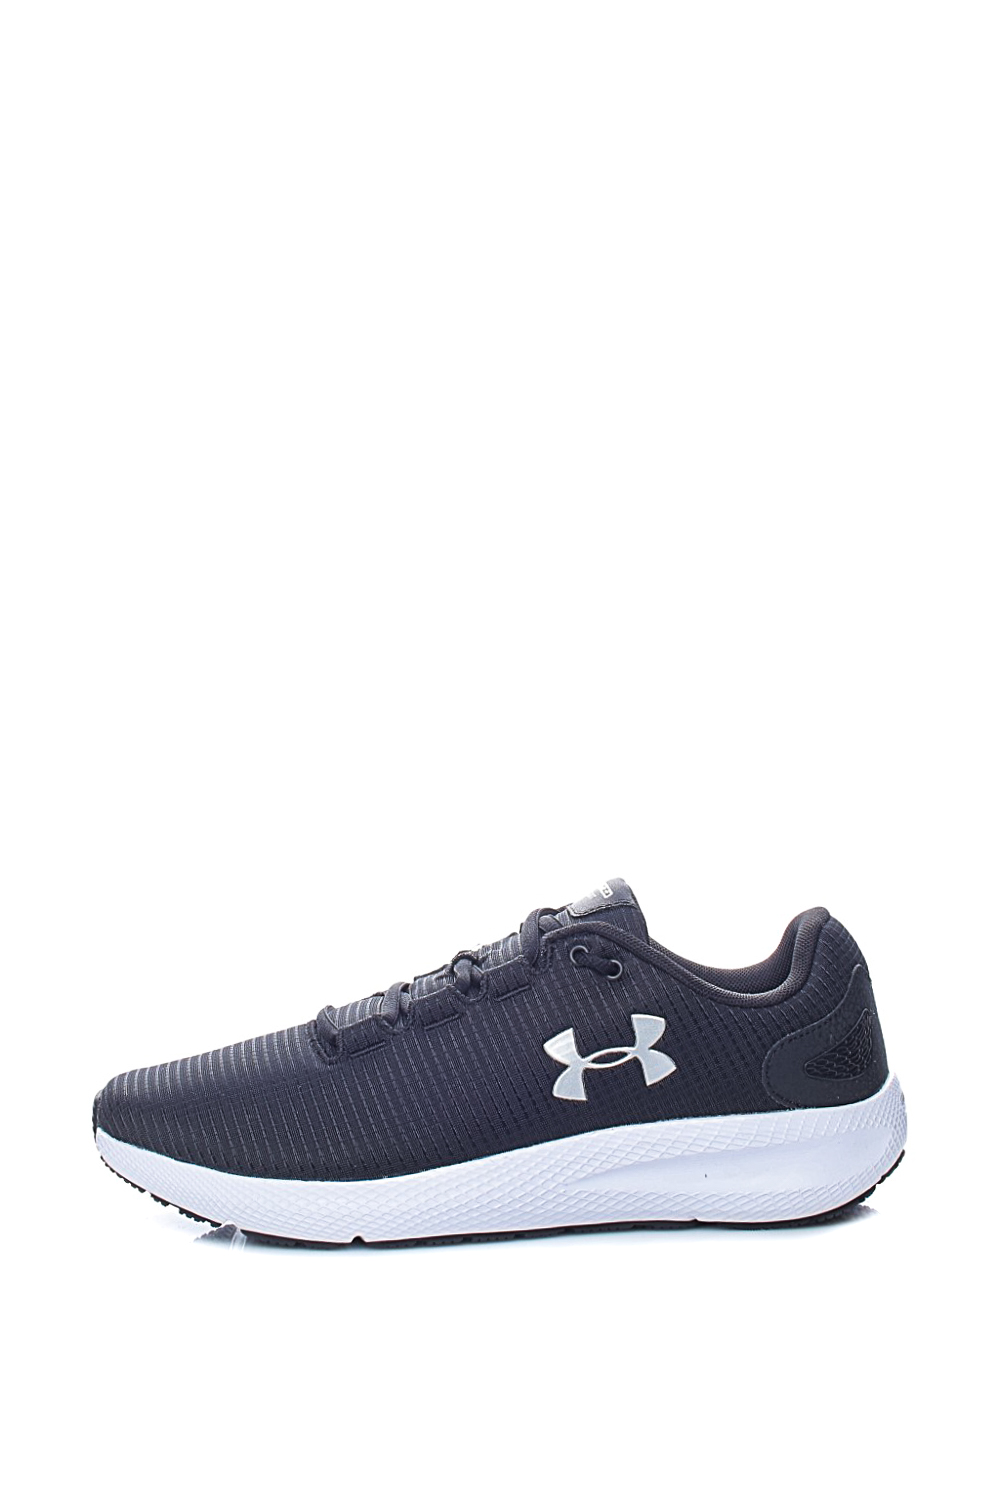 UNDER ARMOUR - Ανδρικά παπούτσια running UNDER ARMOUR Charged Pursuit 2 Rip μαύρα Ανδρικά/Παπούτσια/Αθλητικά/Running